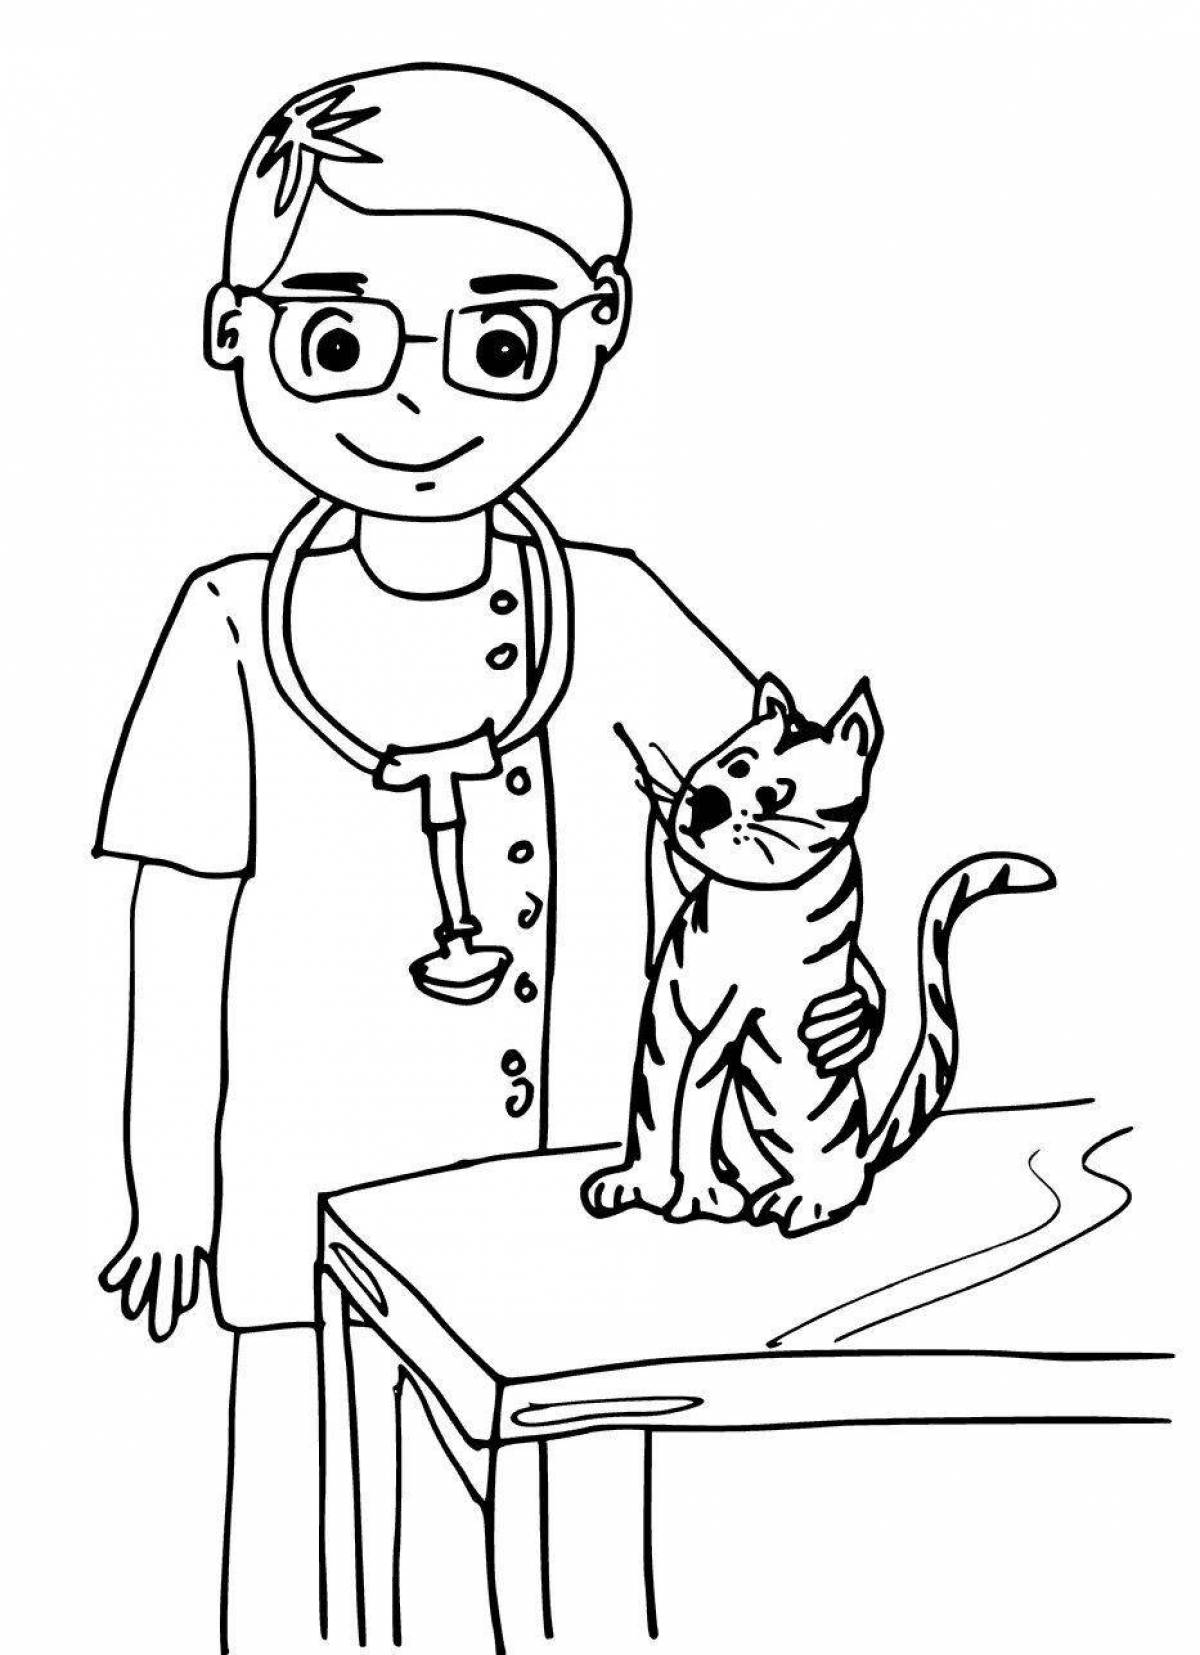 Colorful vet coloring page